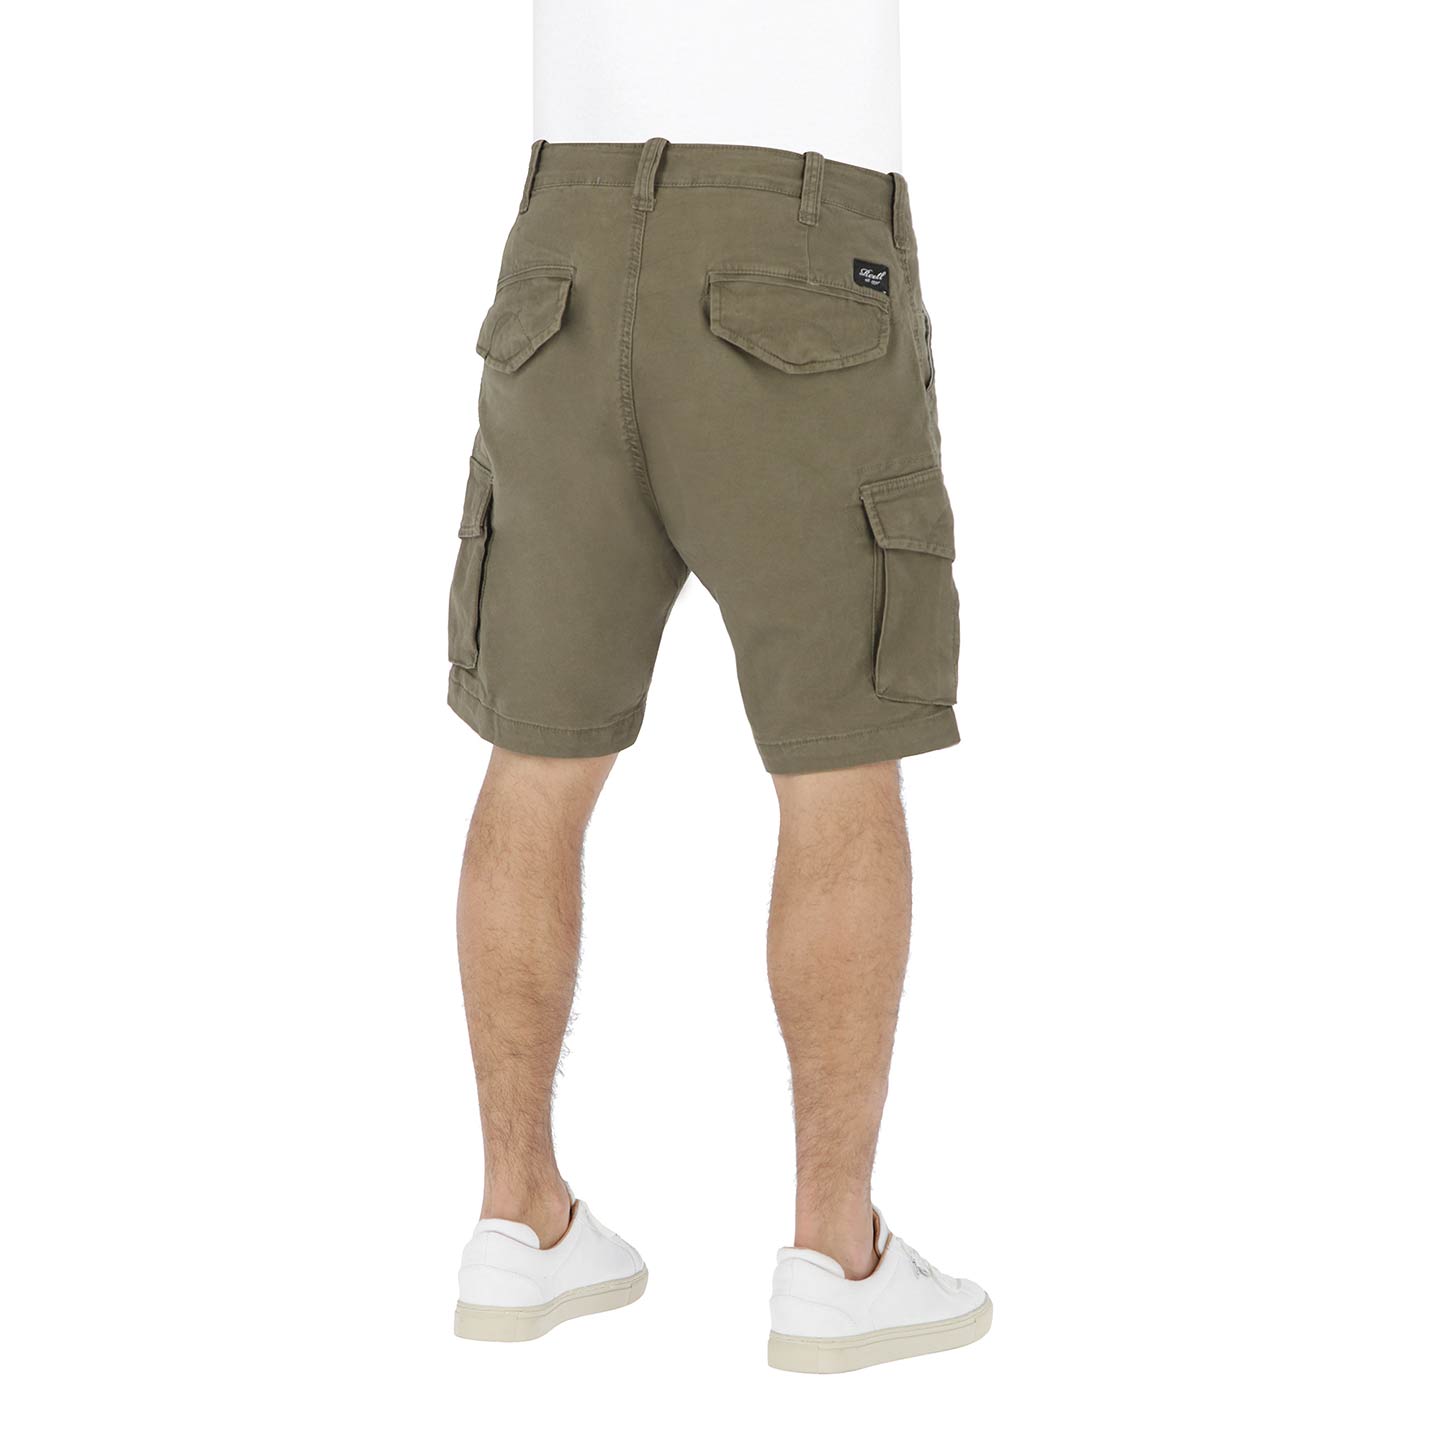 Reell City Cargo Short ST Olive zupport 02